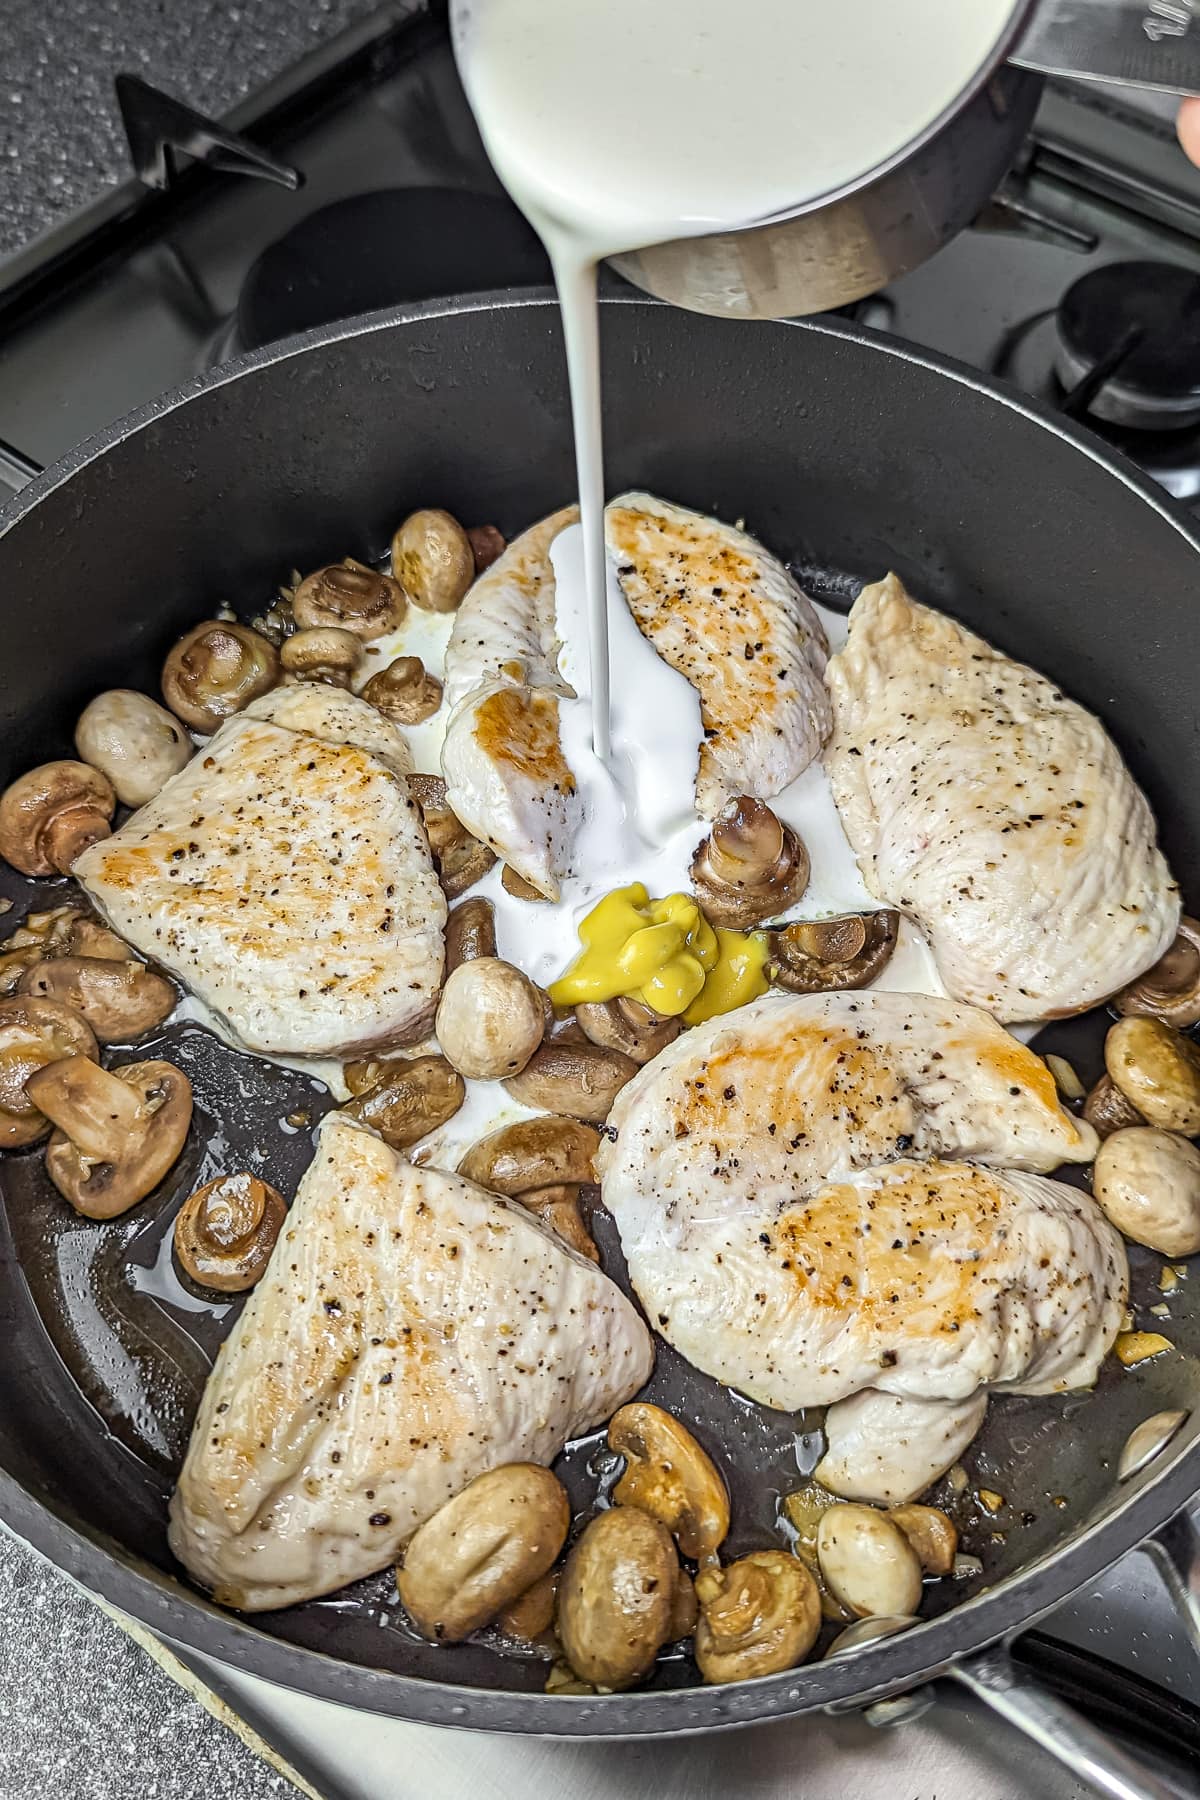 Pouring whipping cream into the sauté pan with seared chicken and golden mushrooms for a rich sauce.